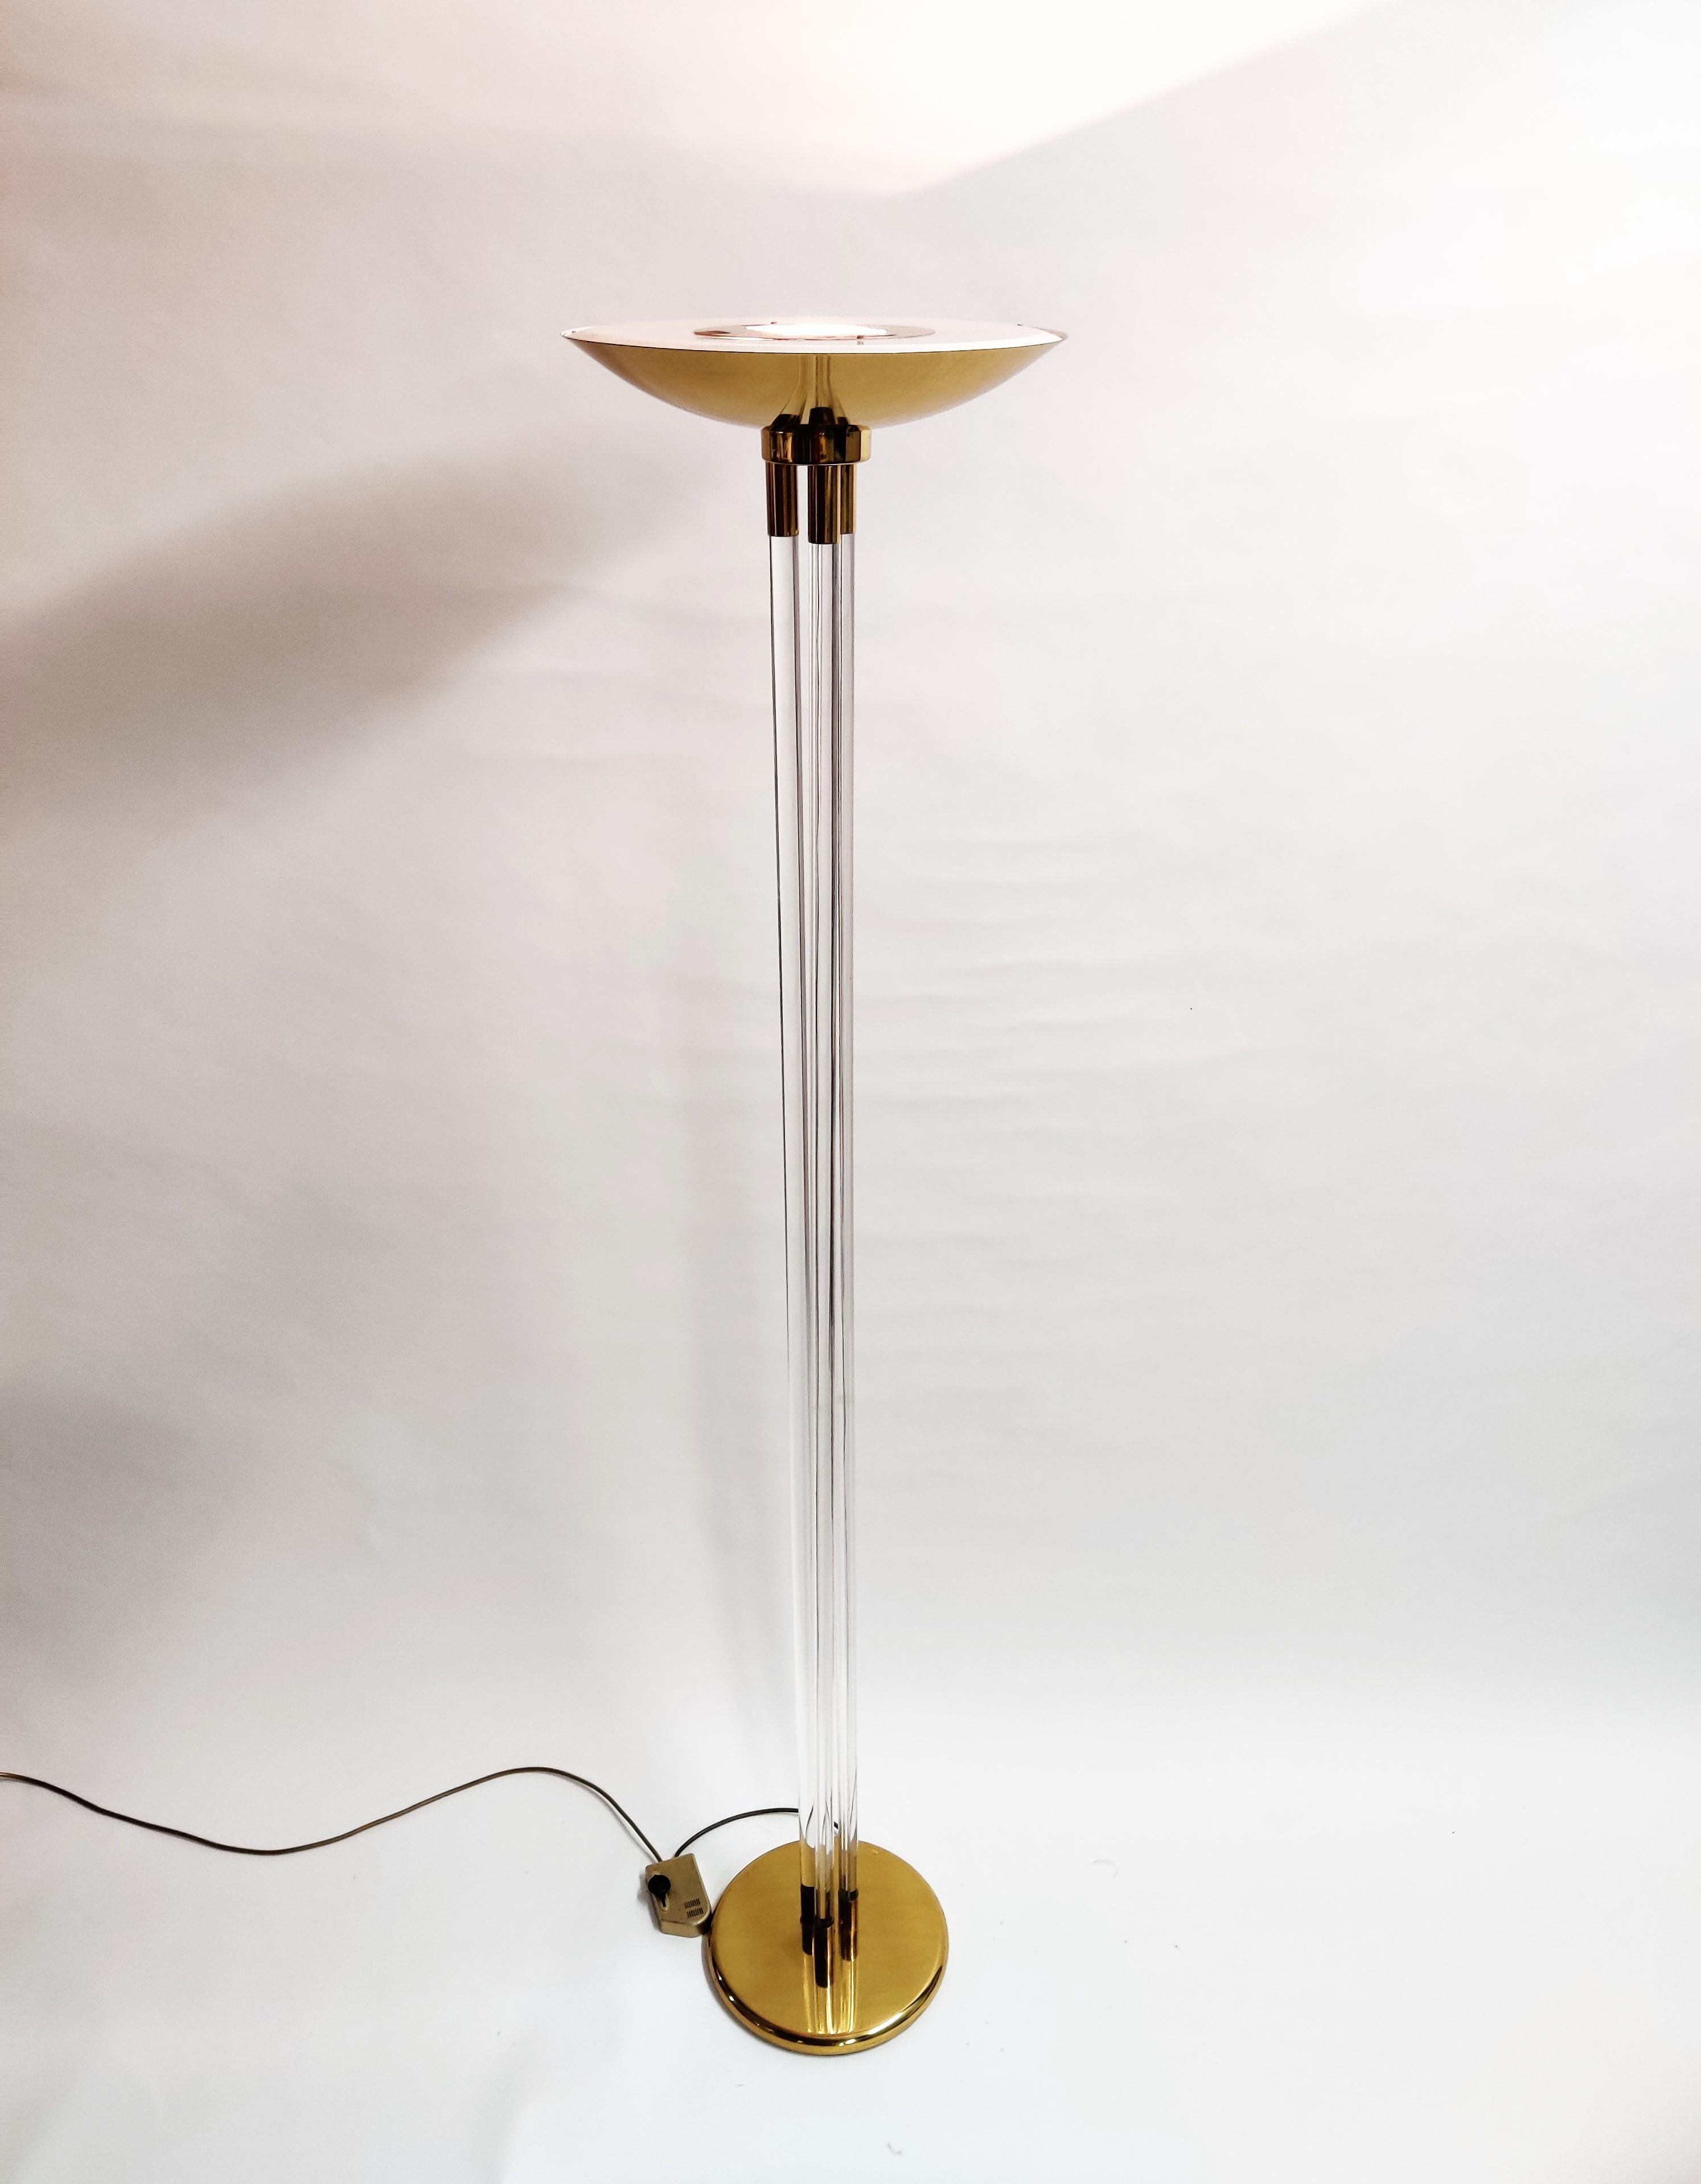 Hollywood regency lucite and brass 'torchiere' floor lamp.

This elegant floor lamp consists of thee lucite legs and a brass base and top.

Beautiful, timeless piece.

Tested and ready to use.

Dimmable light.

1970s - France

Dimensions:
Height: